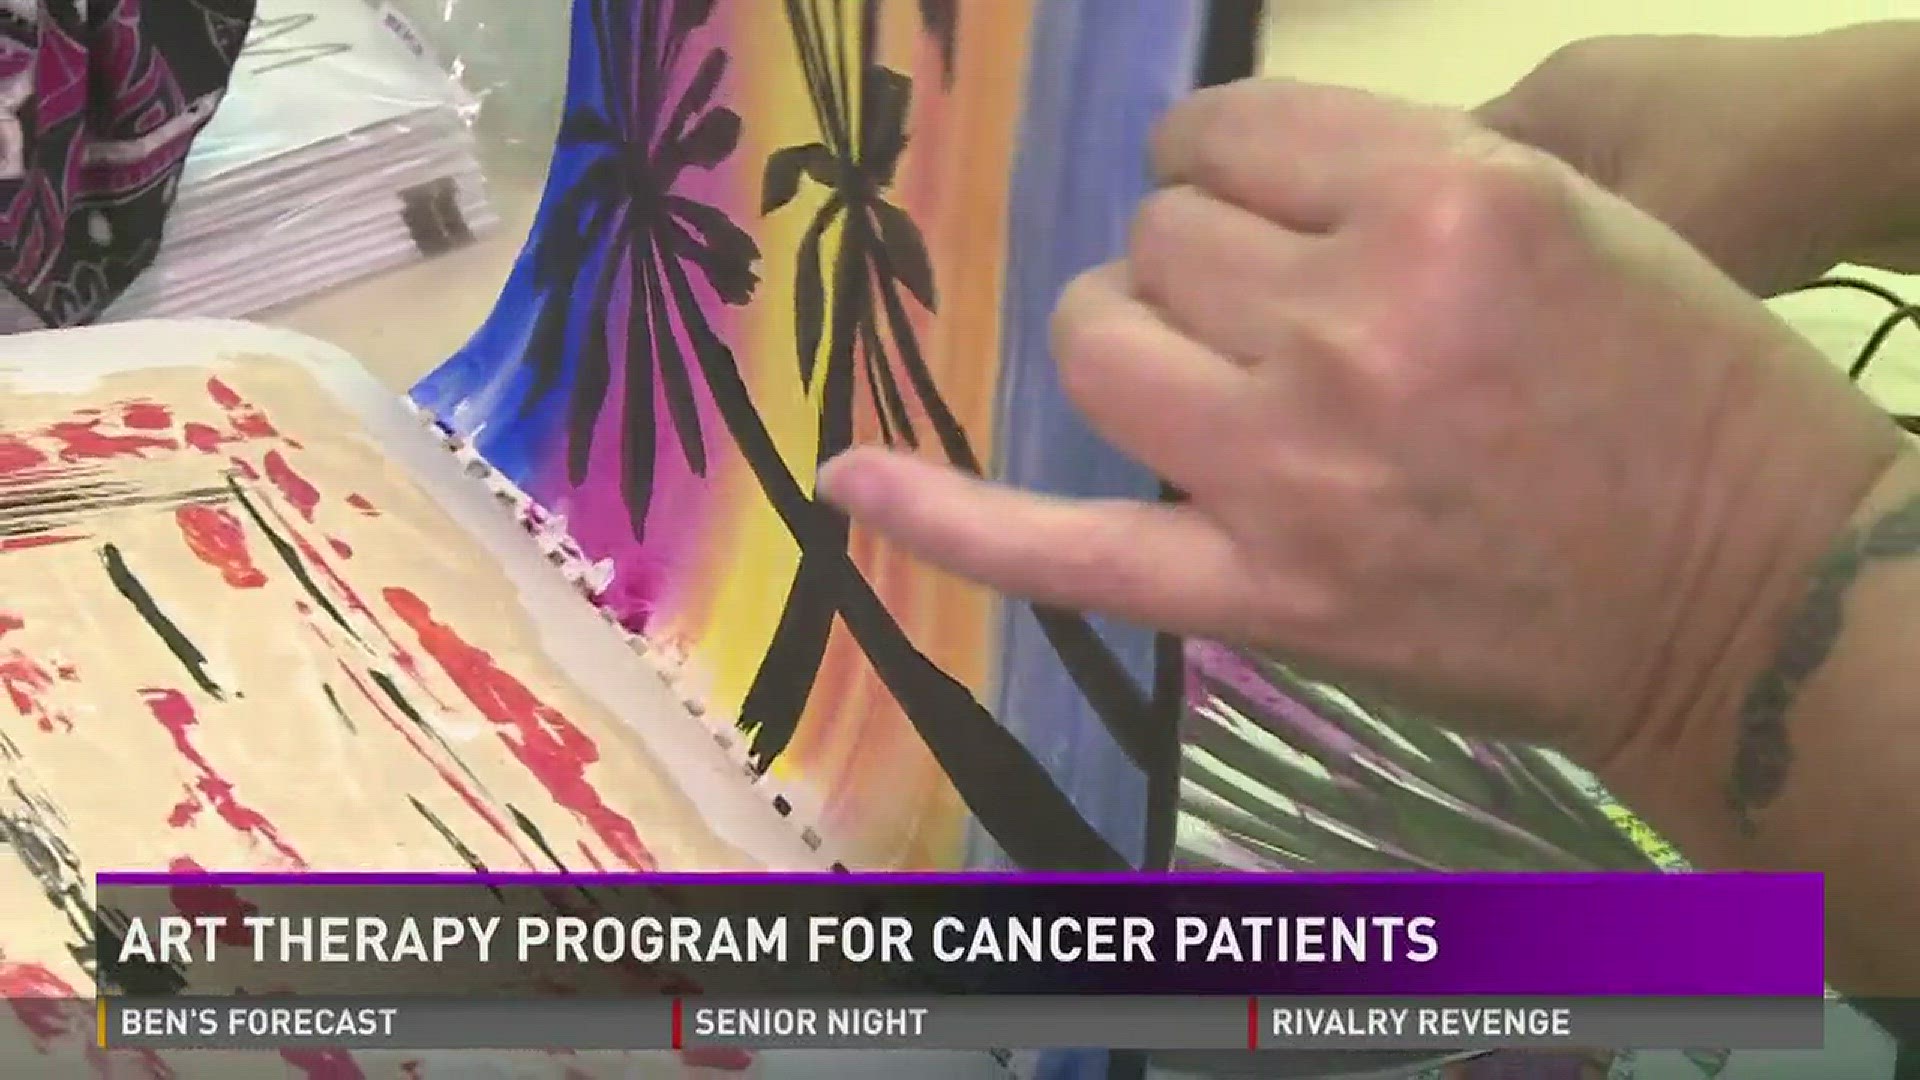 Art therapy program for cancer patients